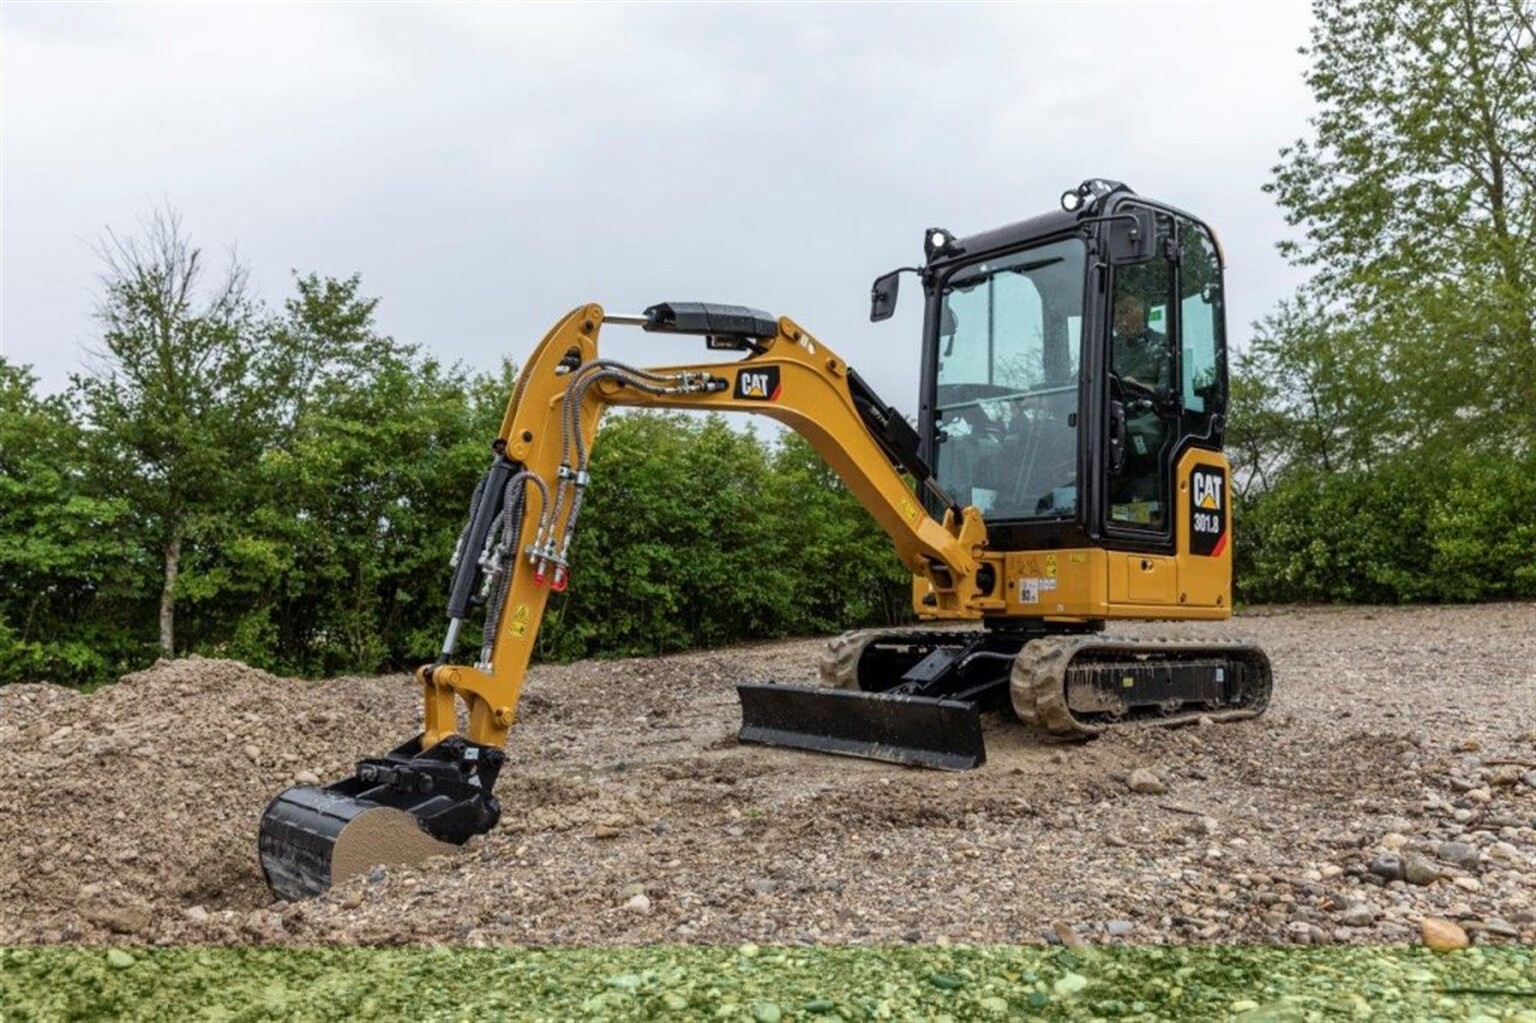 Cat 301.8 Next Gen Excavator from a Different Perspective